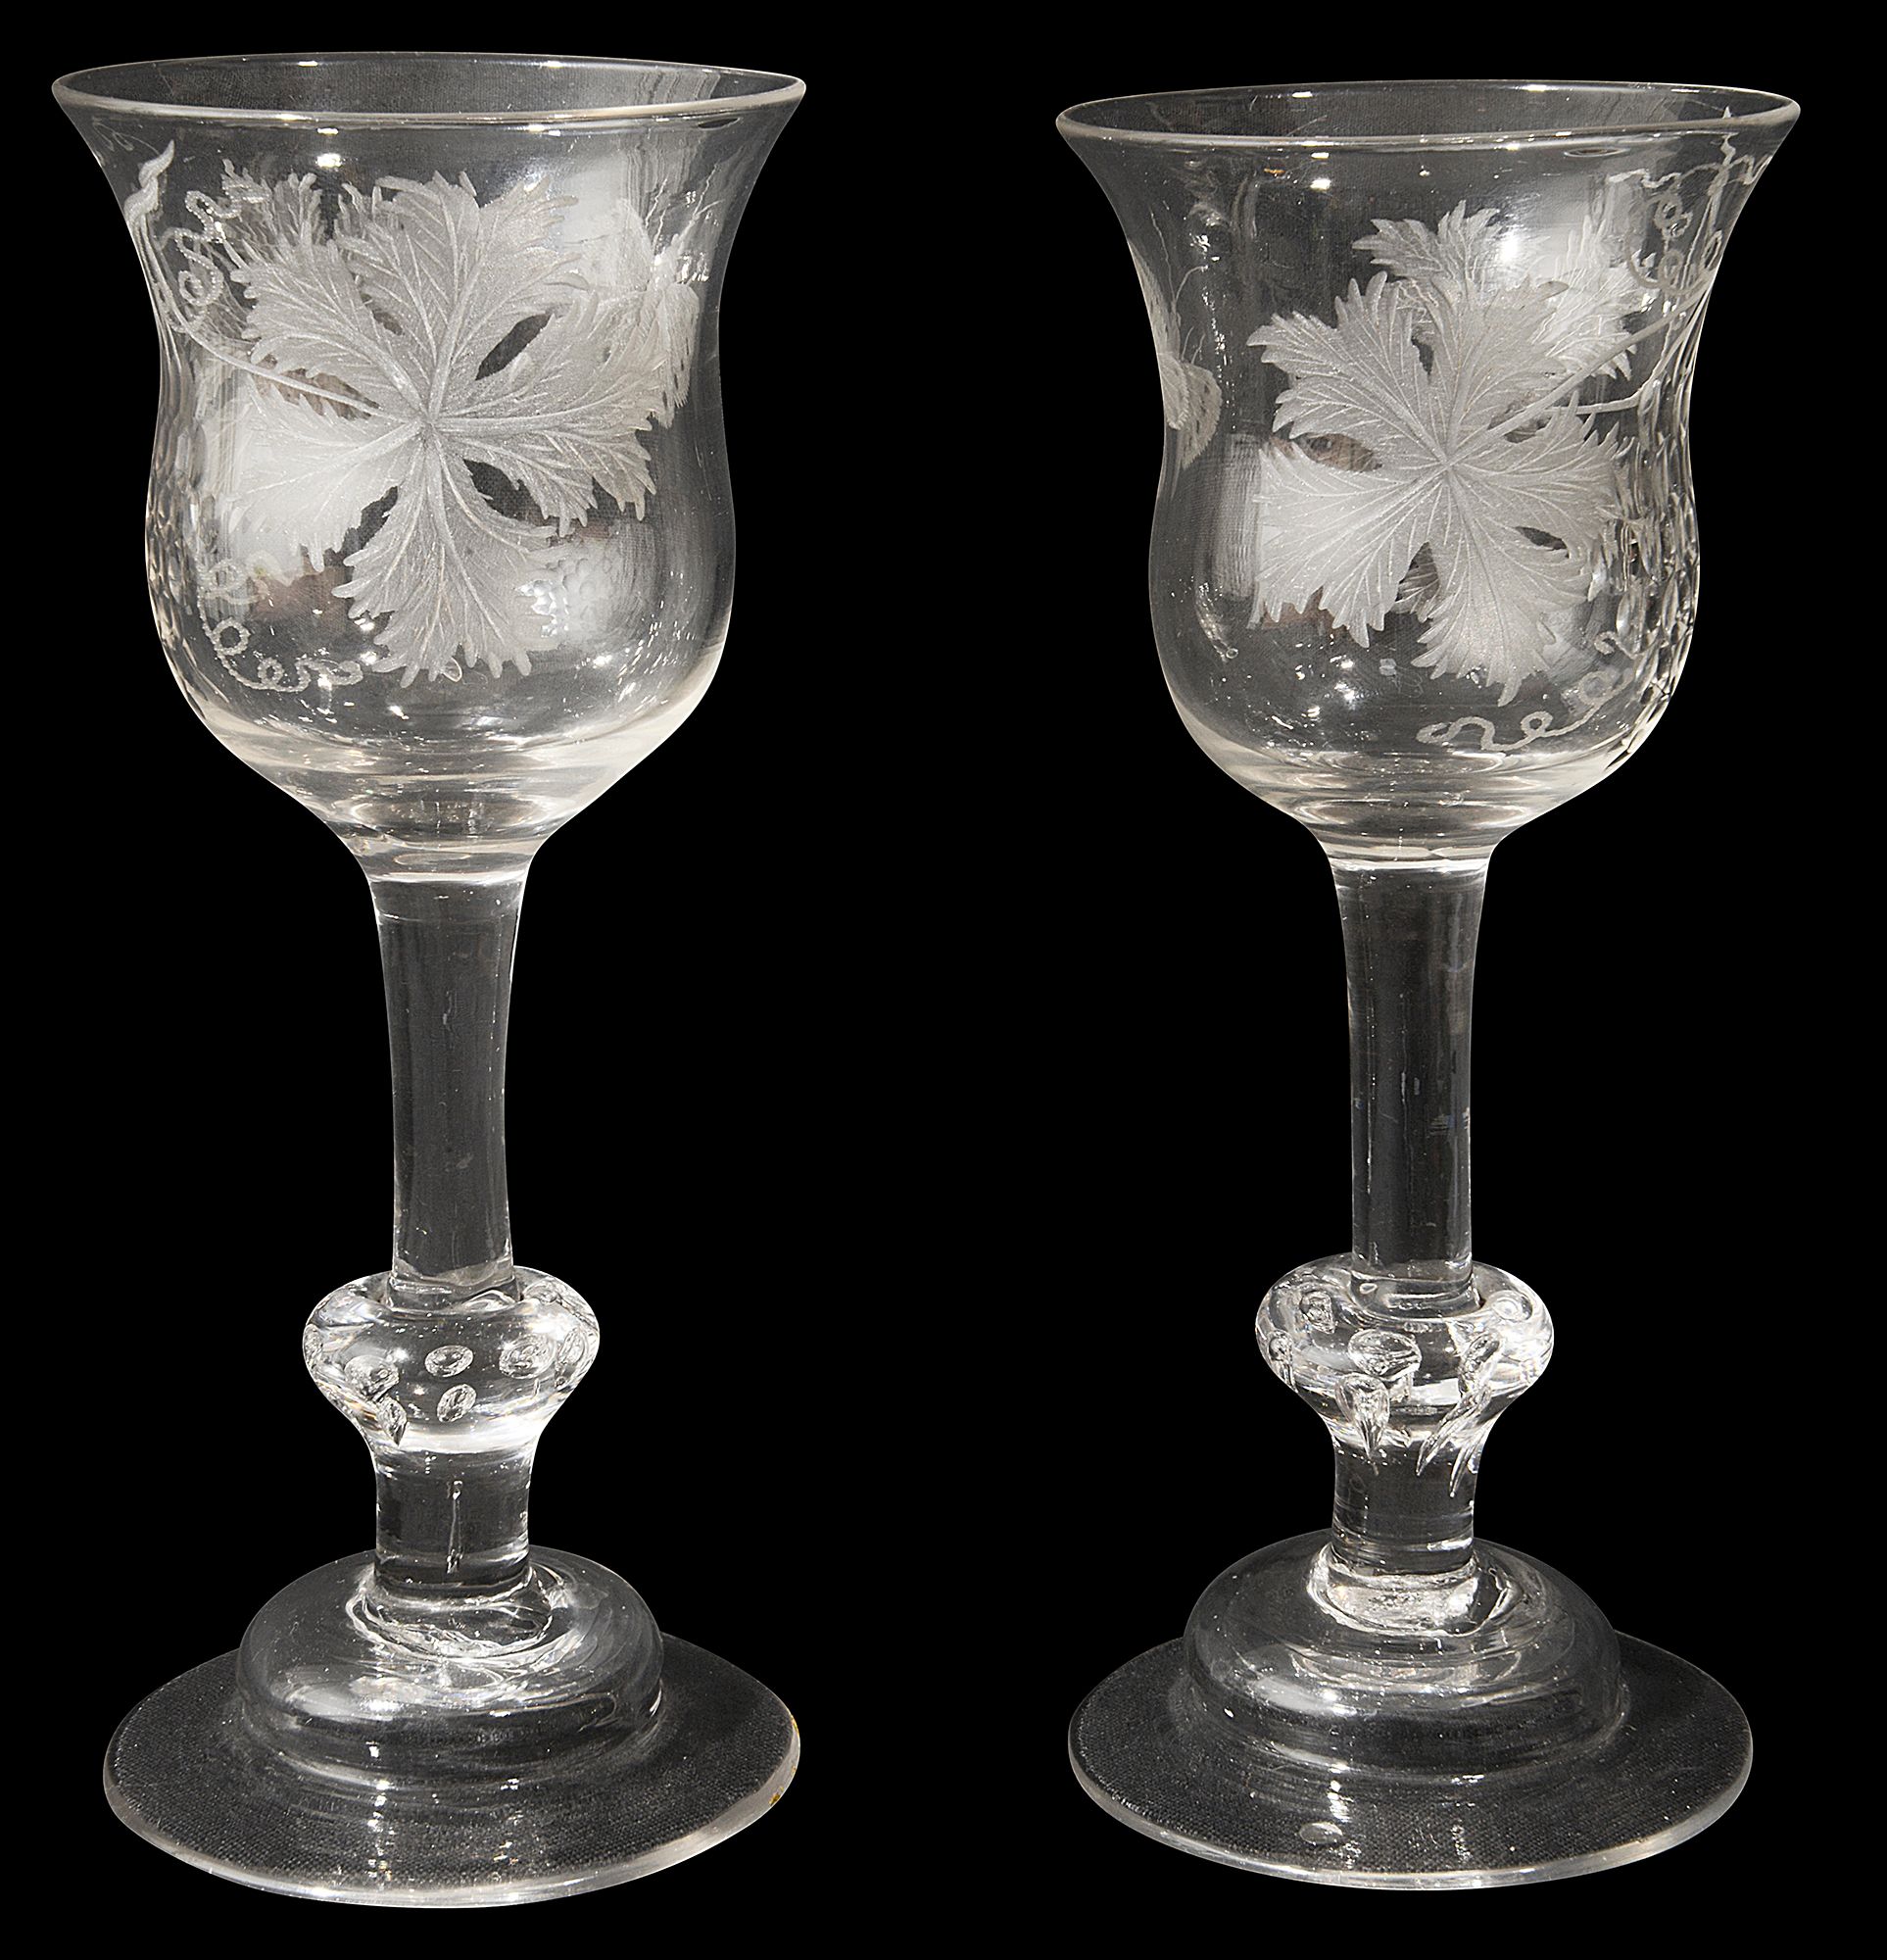 A pair of mid 18th century engraved composite stem wine glasses